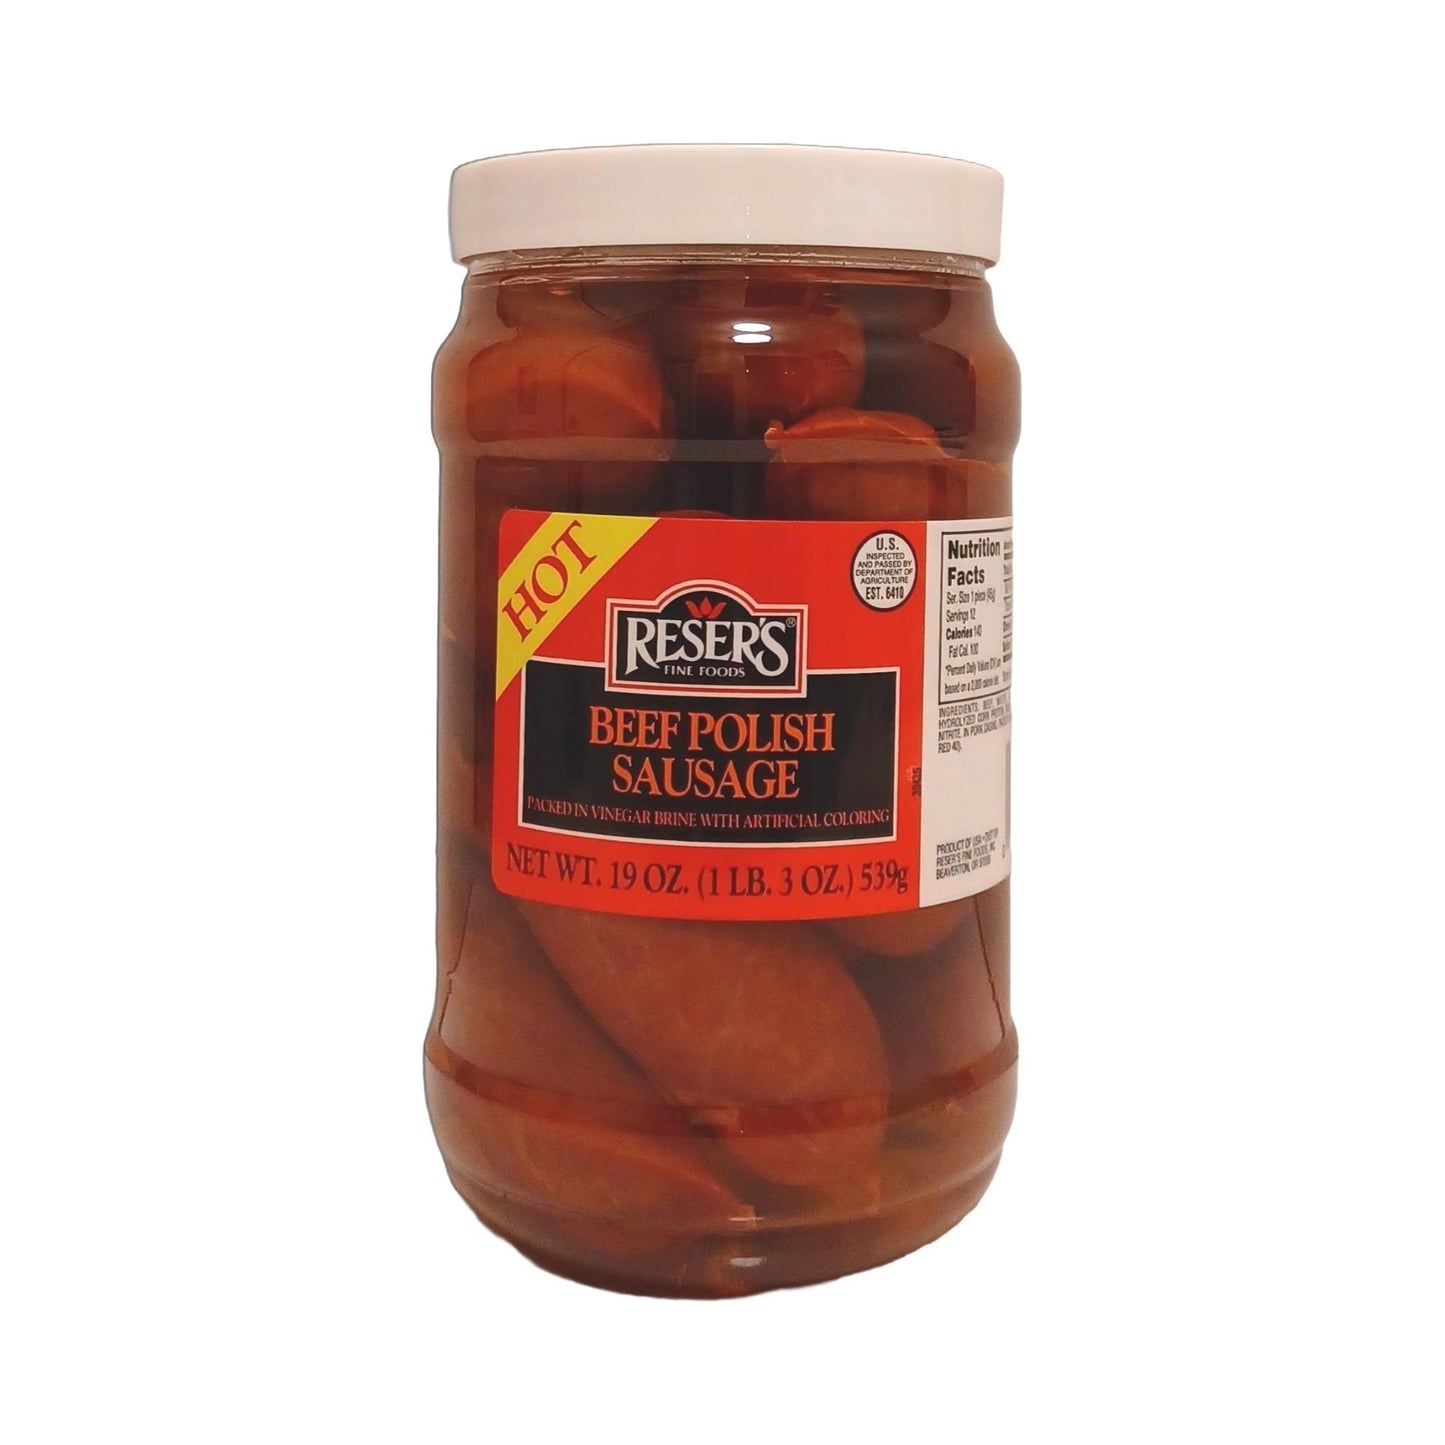 Hot Pickled Beef Polish Sausage by Reser's Case Of 6 / 1 Quart Jars